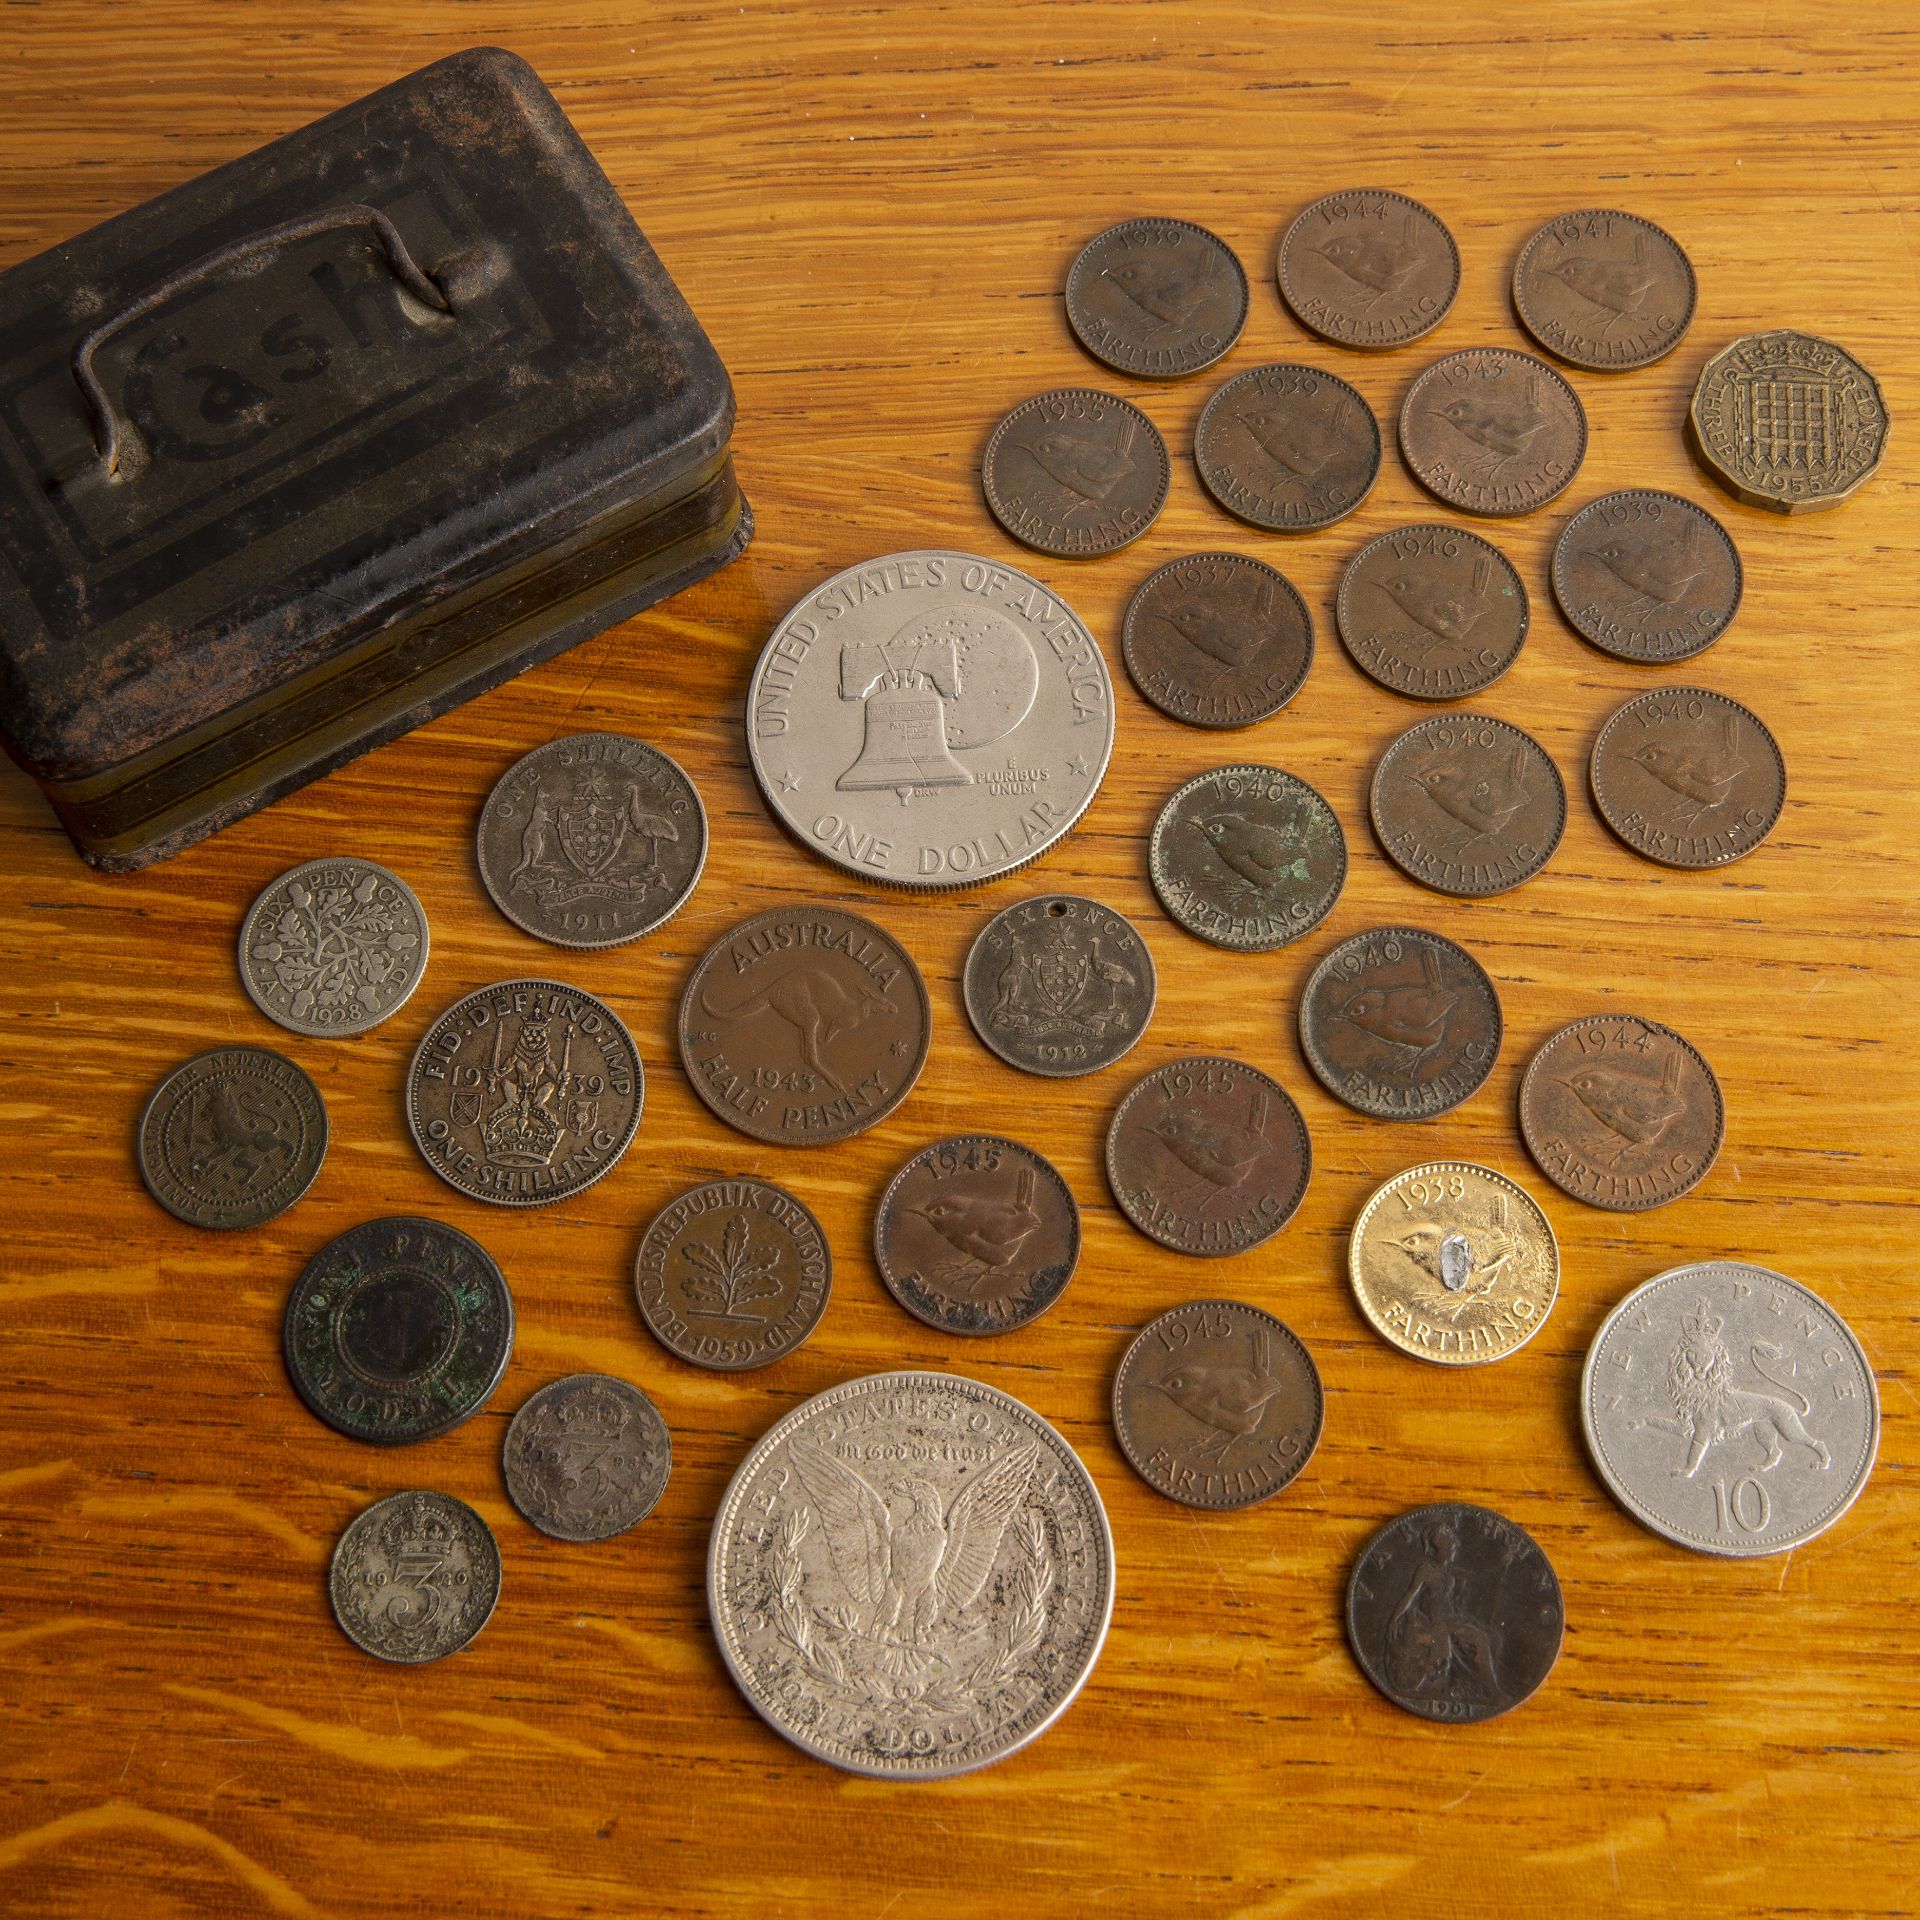 Collection of various coins to include: United States of America 1921 one dollar coin, American 1976